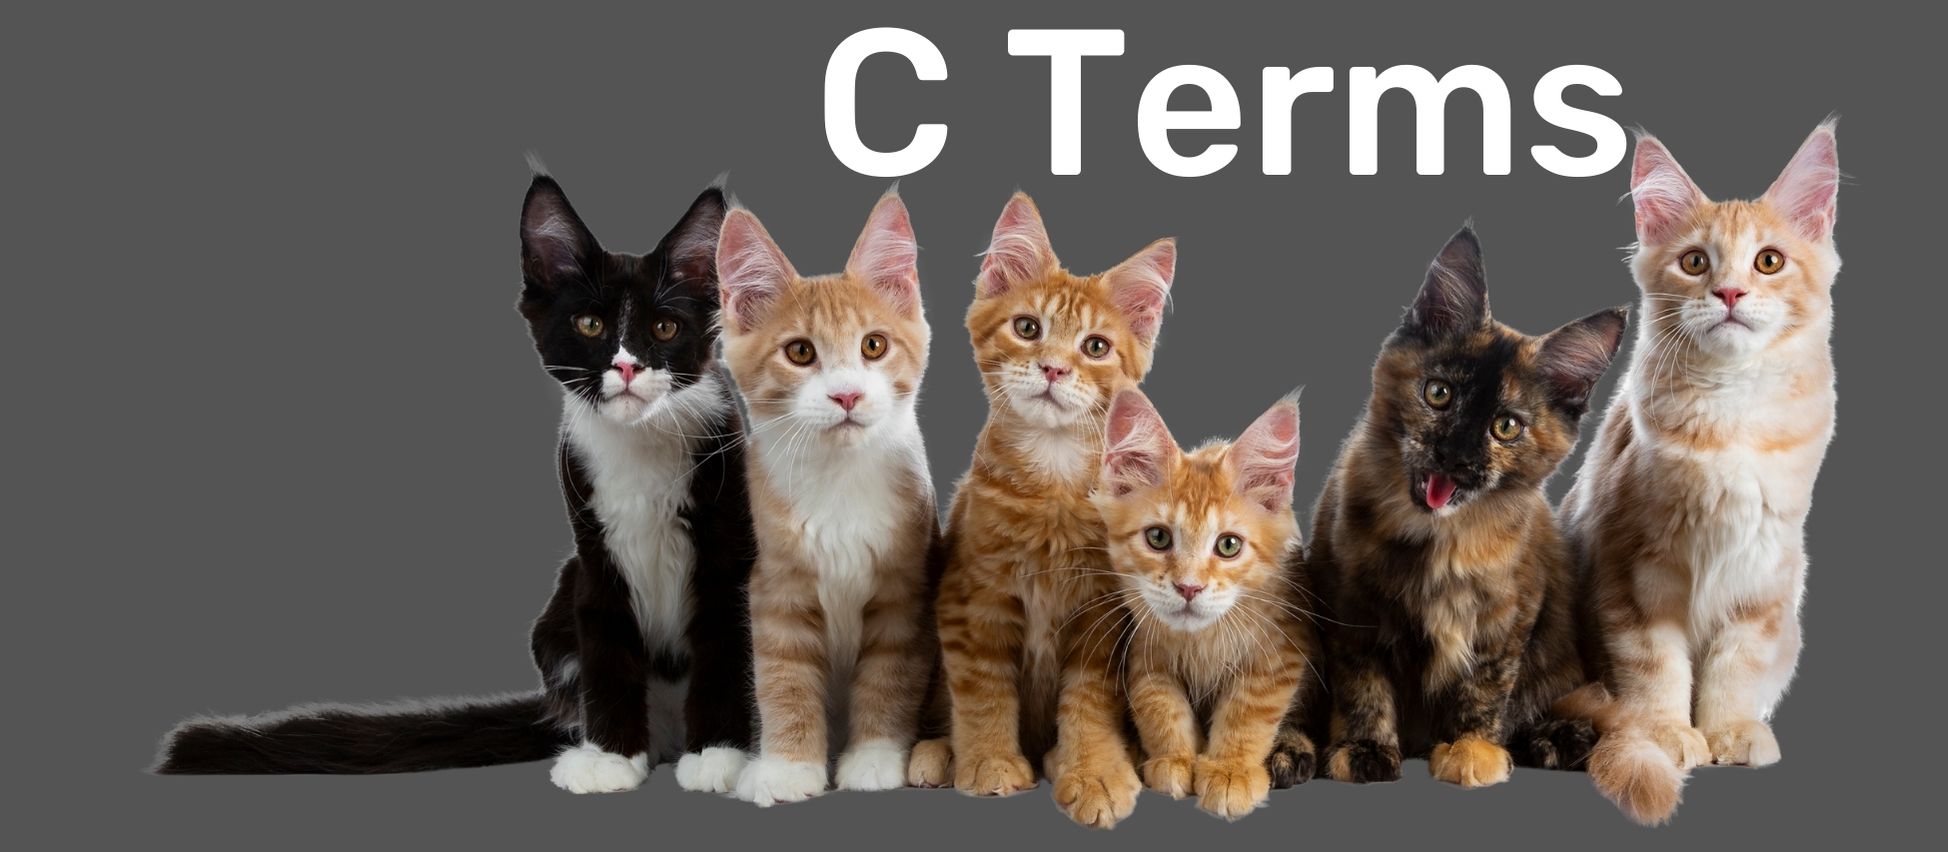 Group of six cats in front of a gray background with text reading 'C Terms' at the top to indicate a new section of the glossary